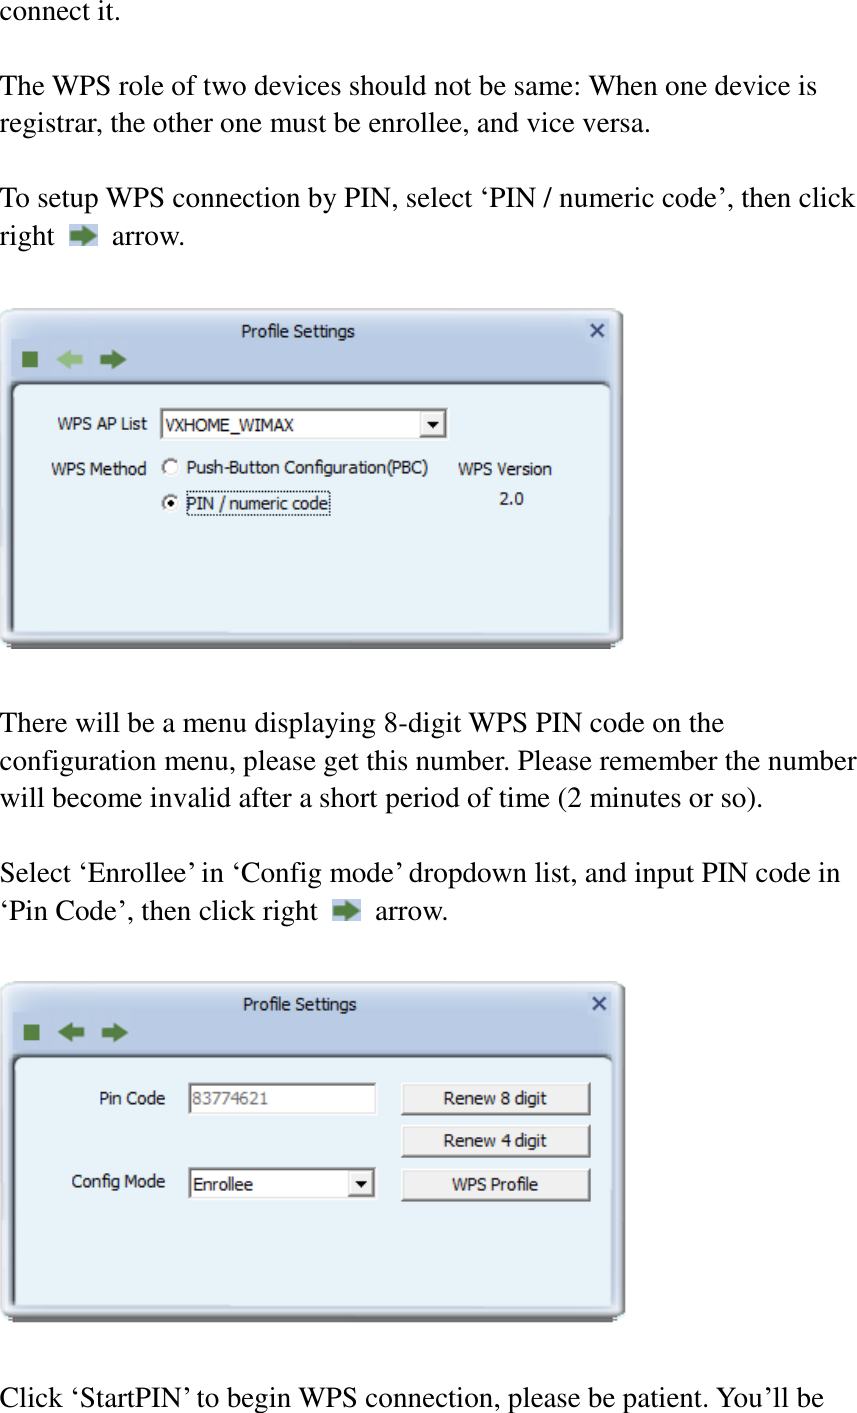 connect it.  The WPS role of two devices should not be same: When one device is registrar, the other one must be enrollee, and vice versa.  To setup WPS connection by PIN, select ‘PIN / numeric code’, then click right    arrow.    There will be a menu displaying 8-digit WPS PIN code on the configuration menu, please get this number. Please remember the number will become invalid after a short period of time (2 minutes or so).  Select ‘Enrollee’ in ‘Config mode’ dropdown list, and input PIN code in ‘Pin Code’, then click right    arrow.    Click ‘StartPIN’ to begin WPS connection, please be patient. You’ll be 